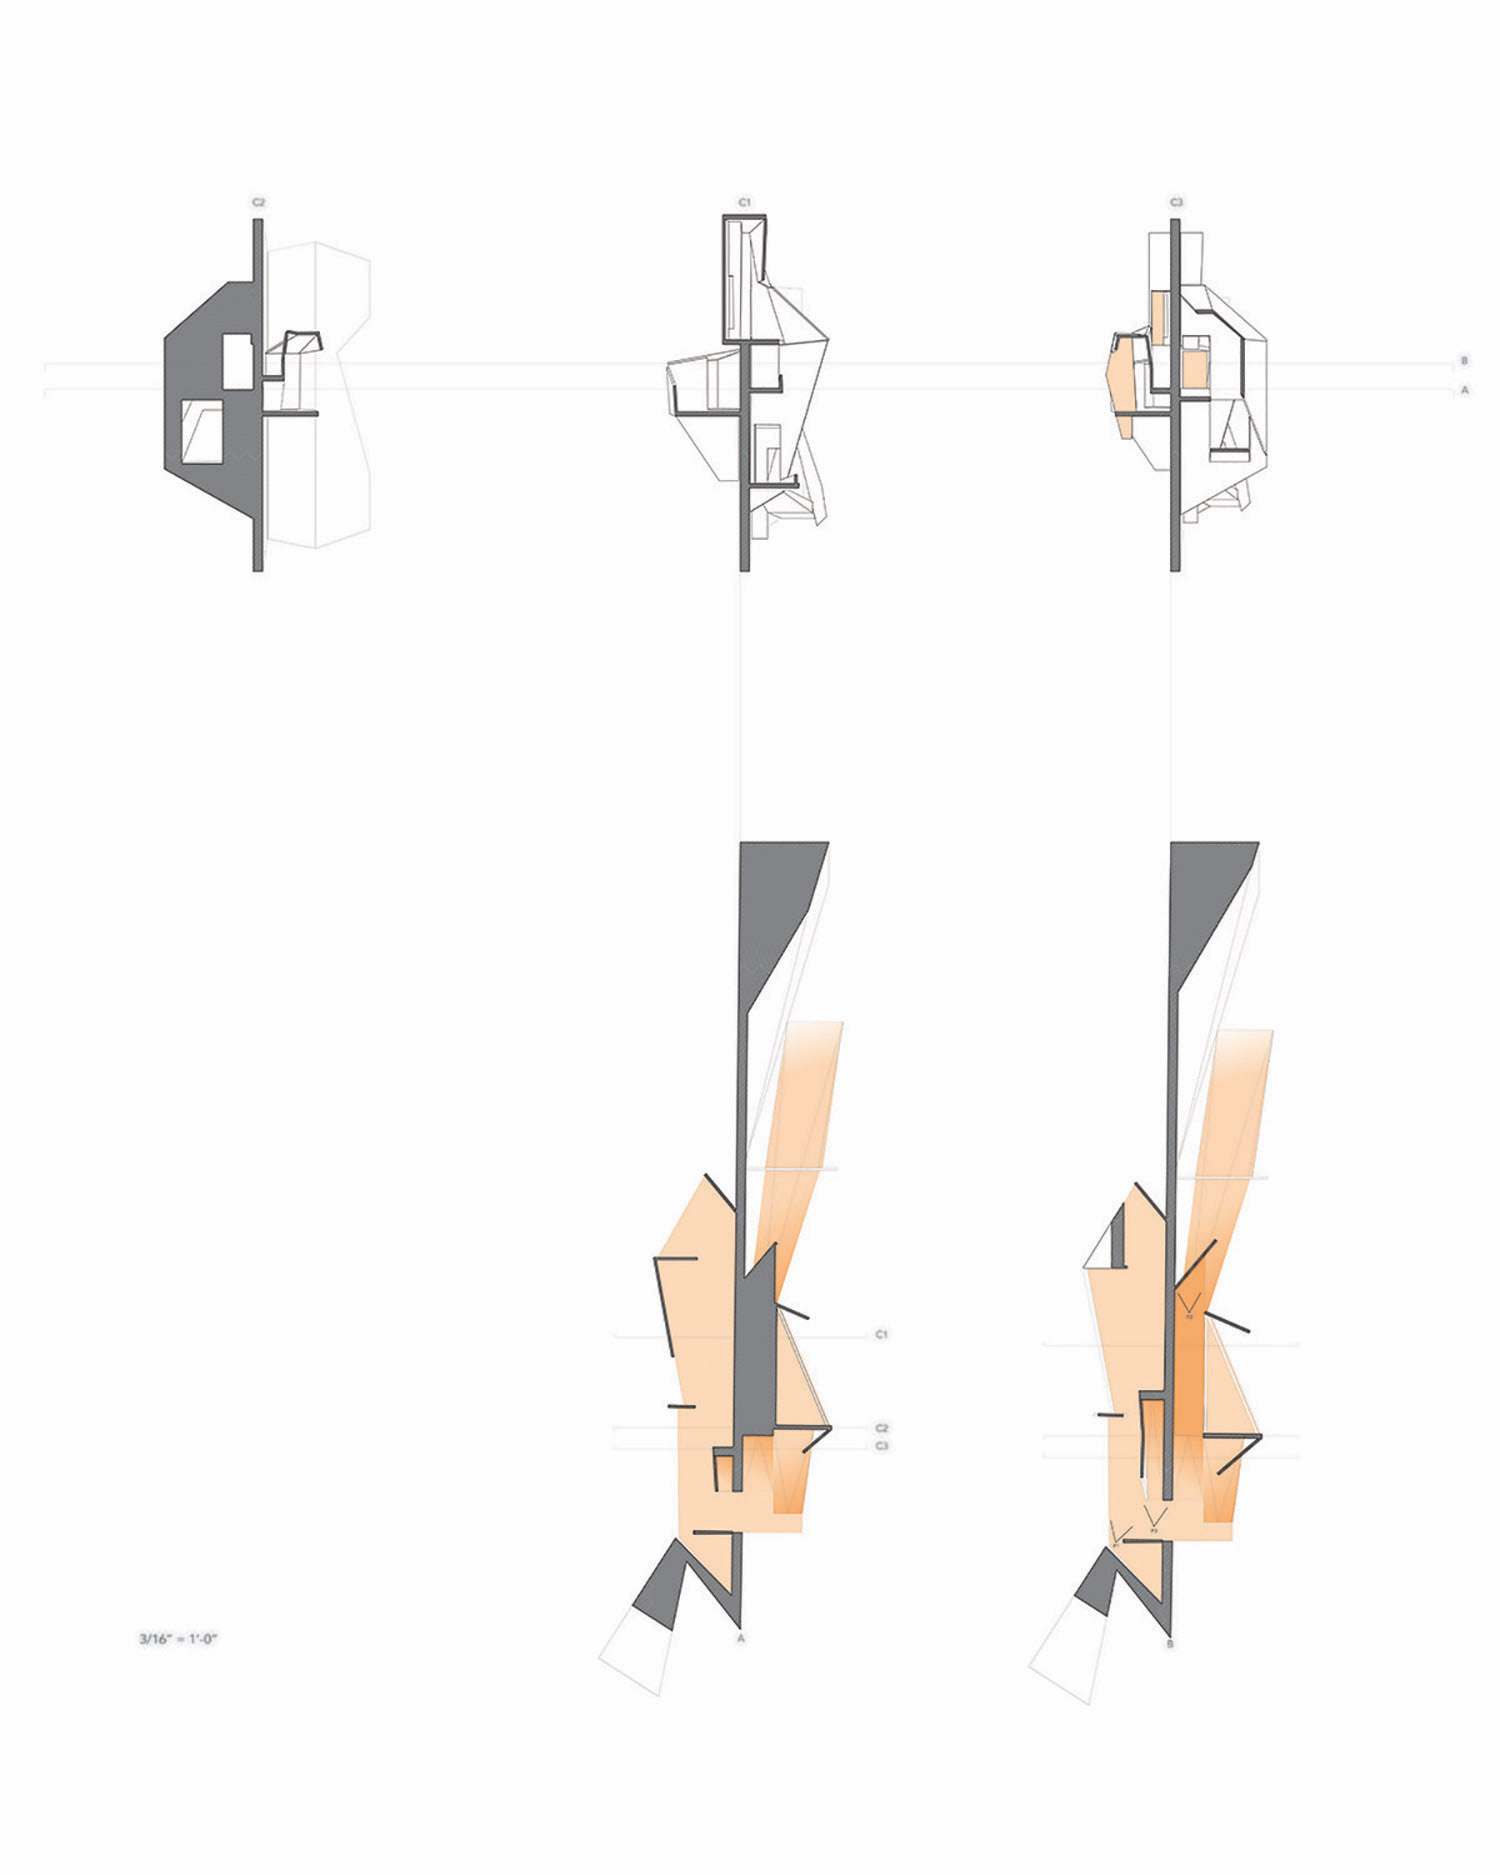 Wall Plans and Sections